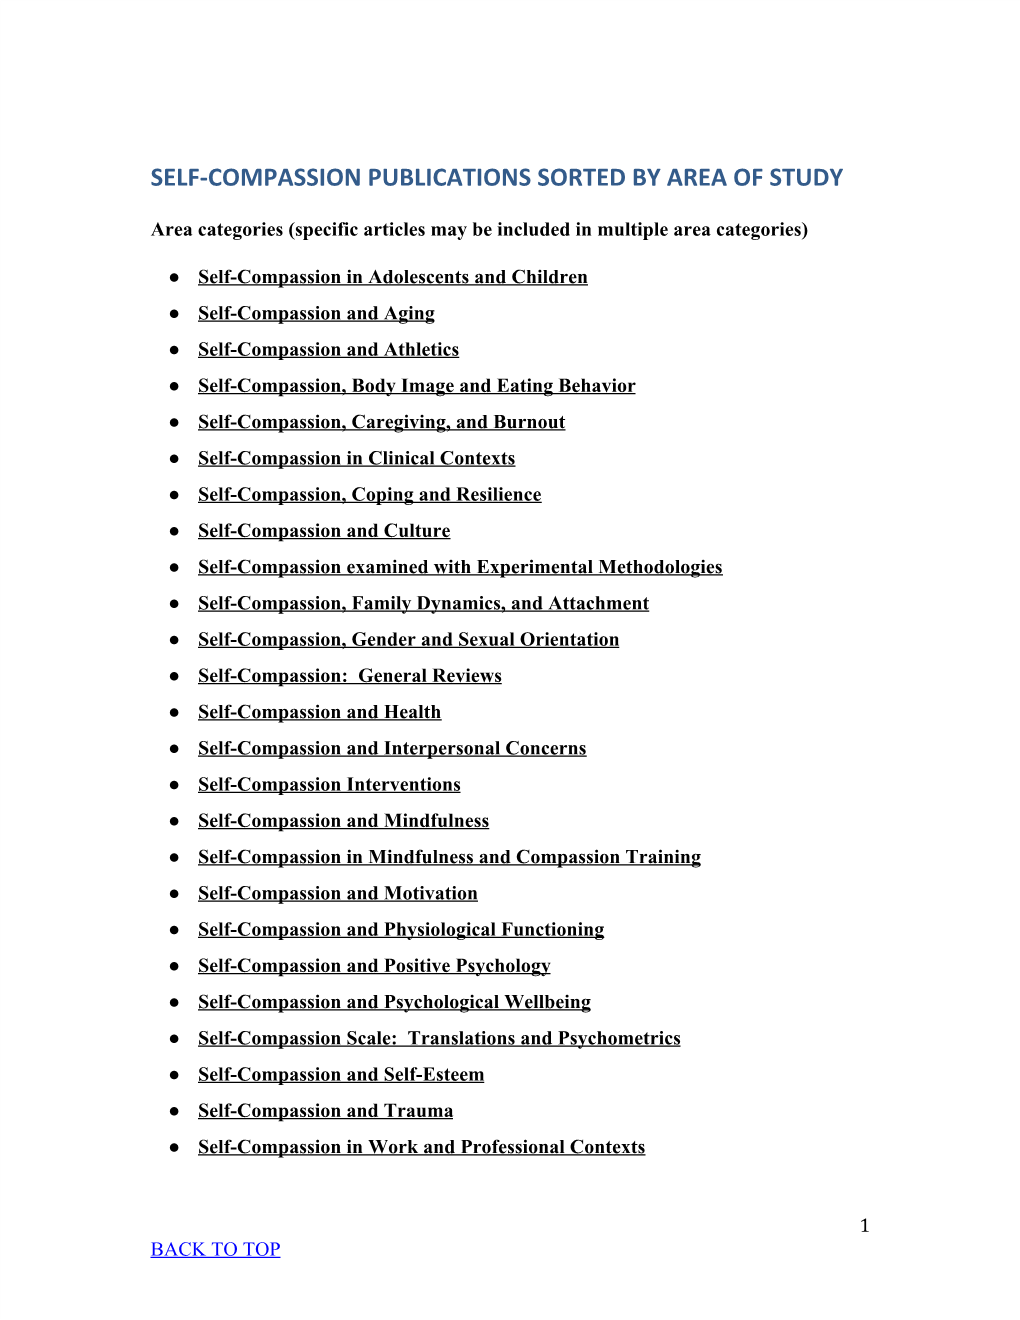 Self-Compassion Publications Sorted by Area of Study